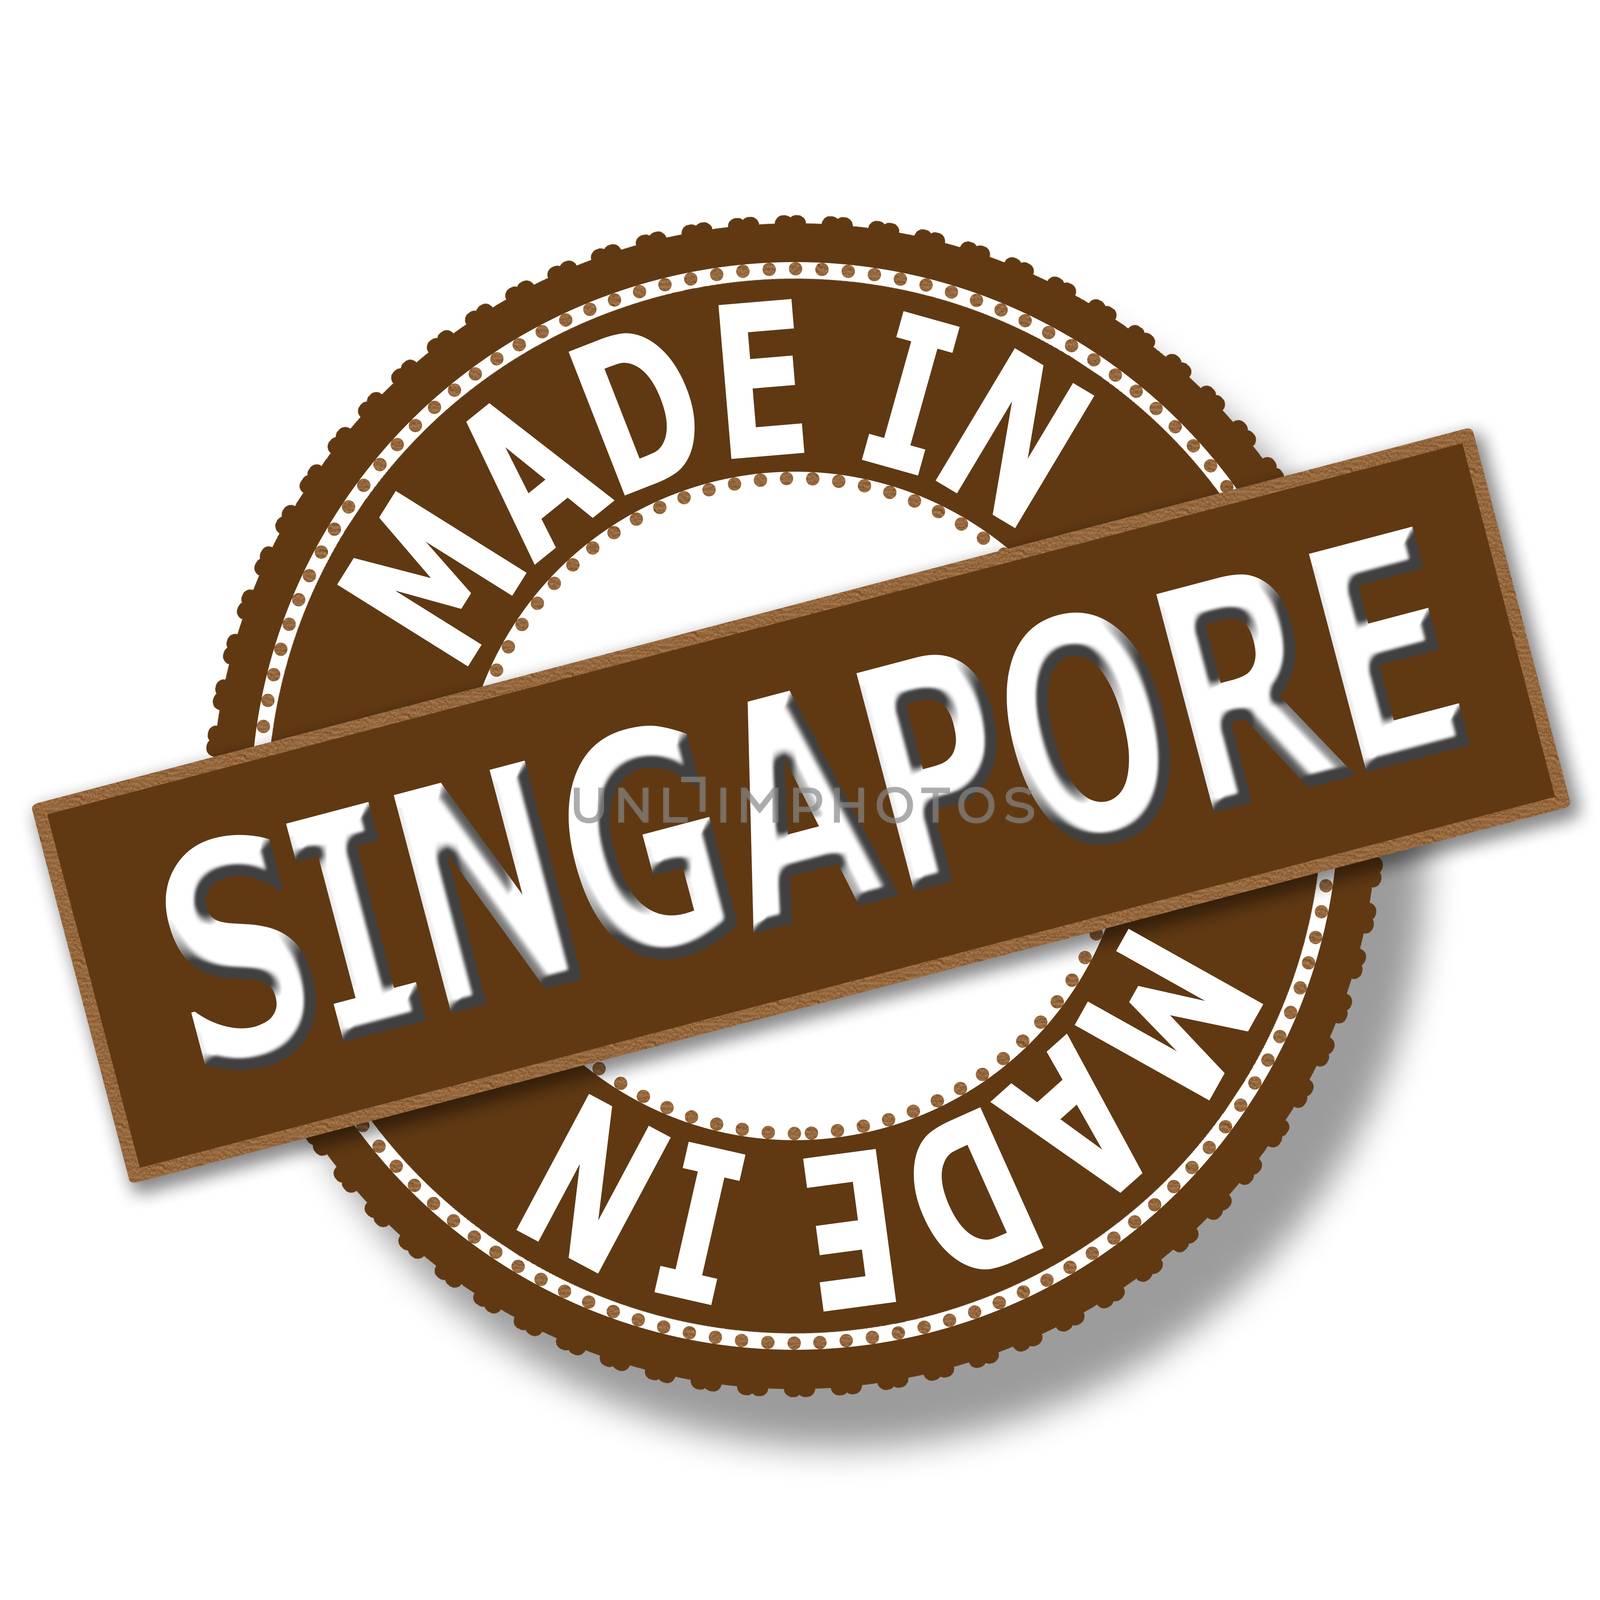 Made in Singapore brown round vintage stamp by tang90246